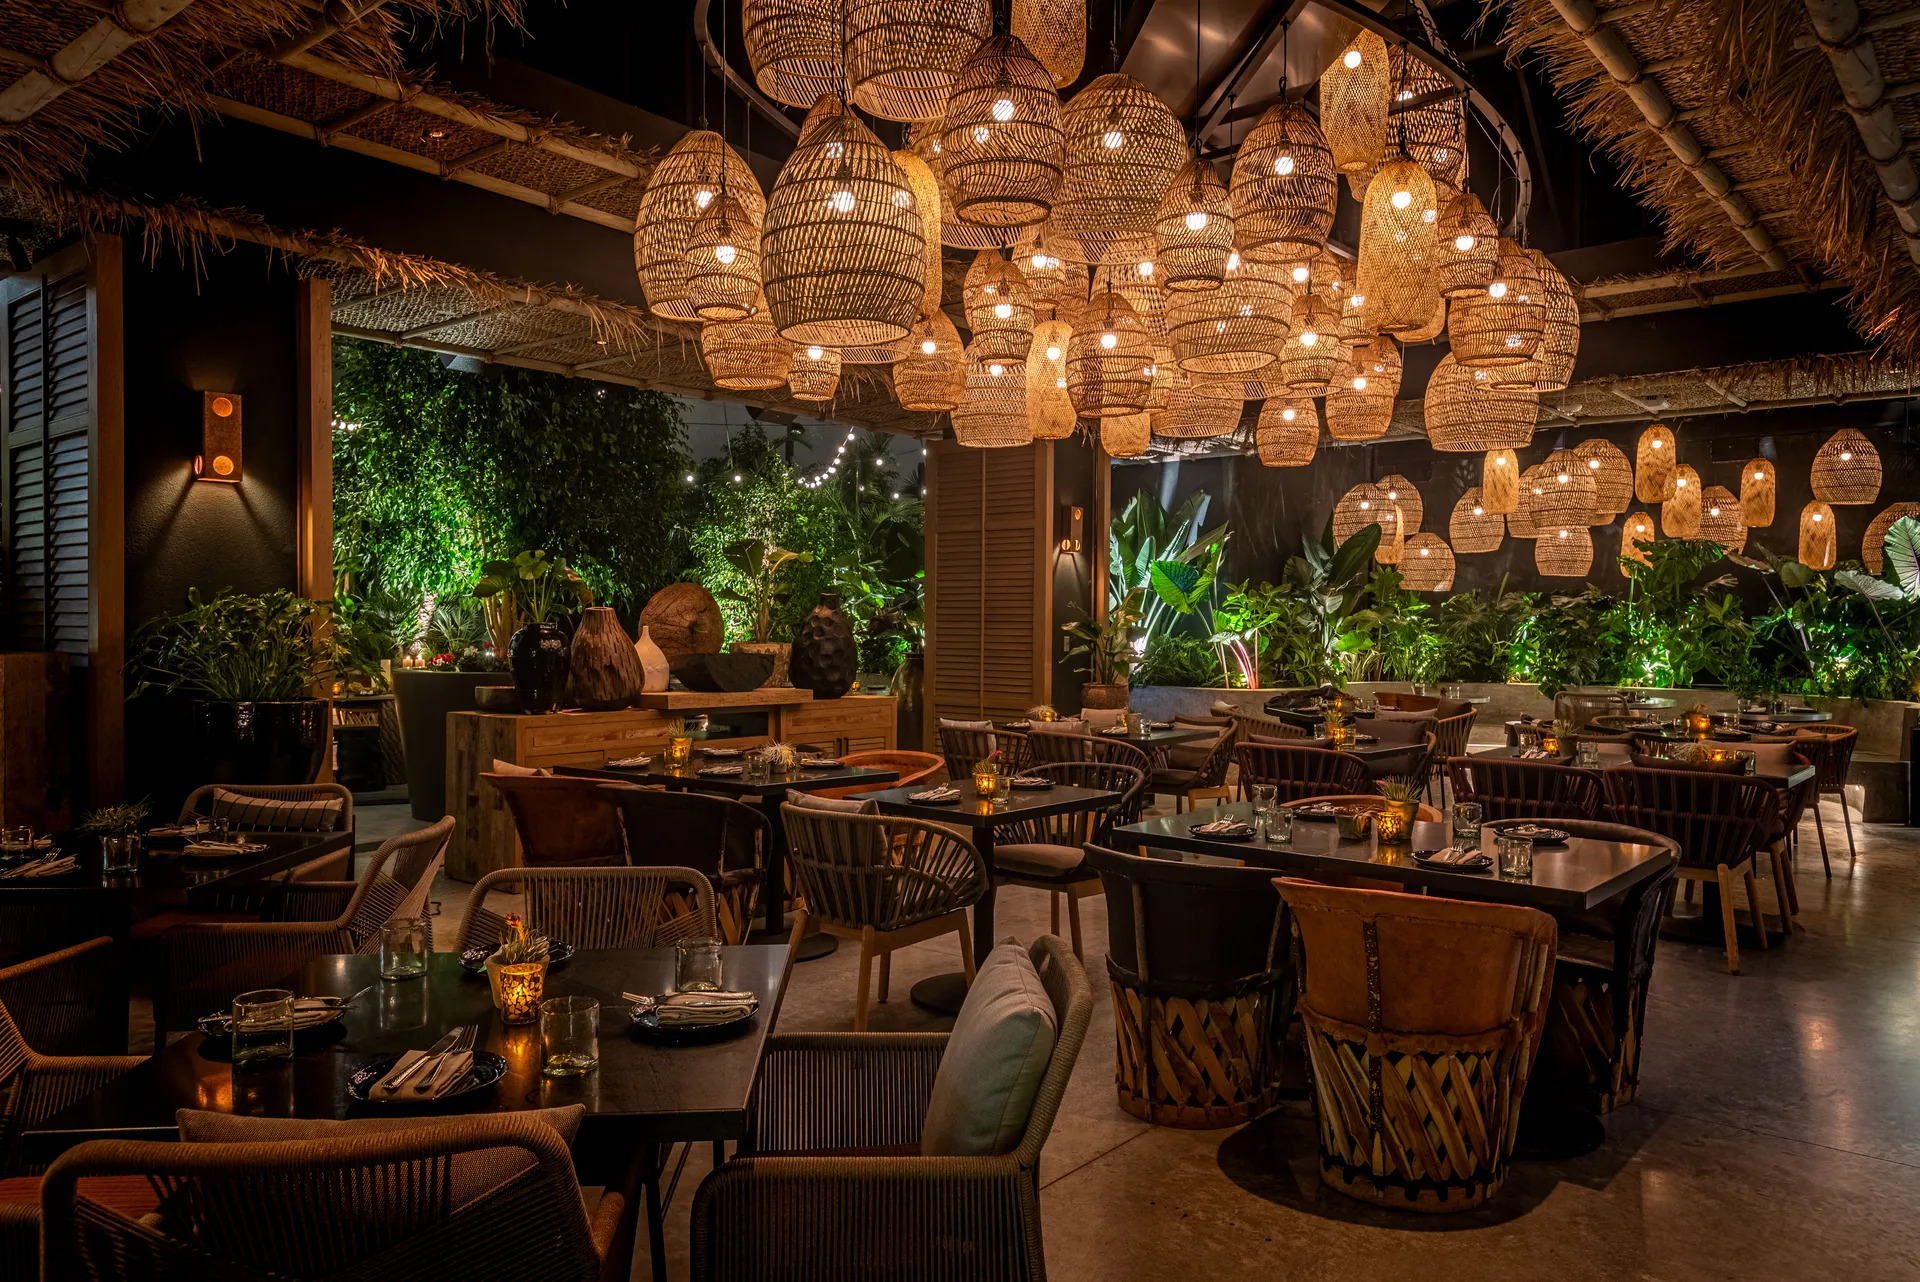 A dimly lit restaurant with wooden tables and glowing, hanging basket lights.